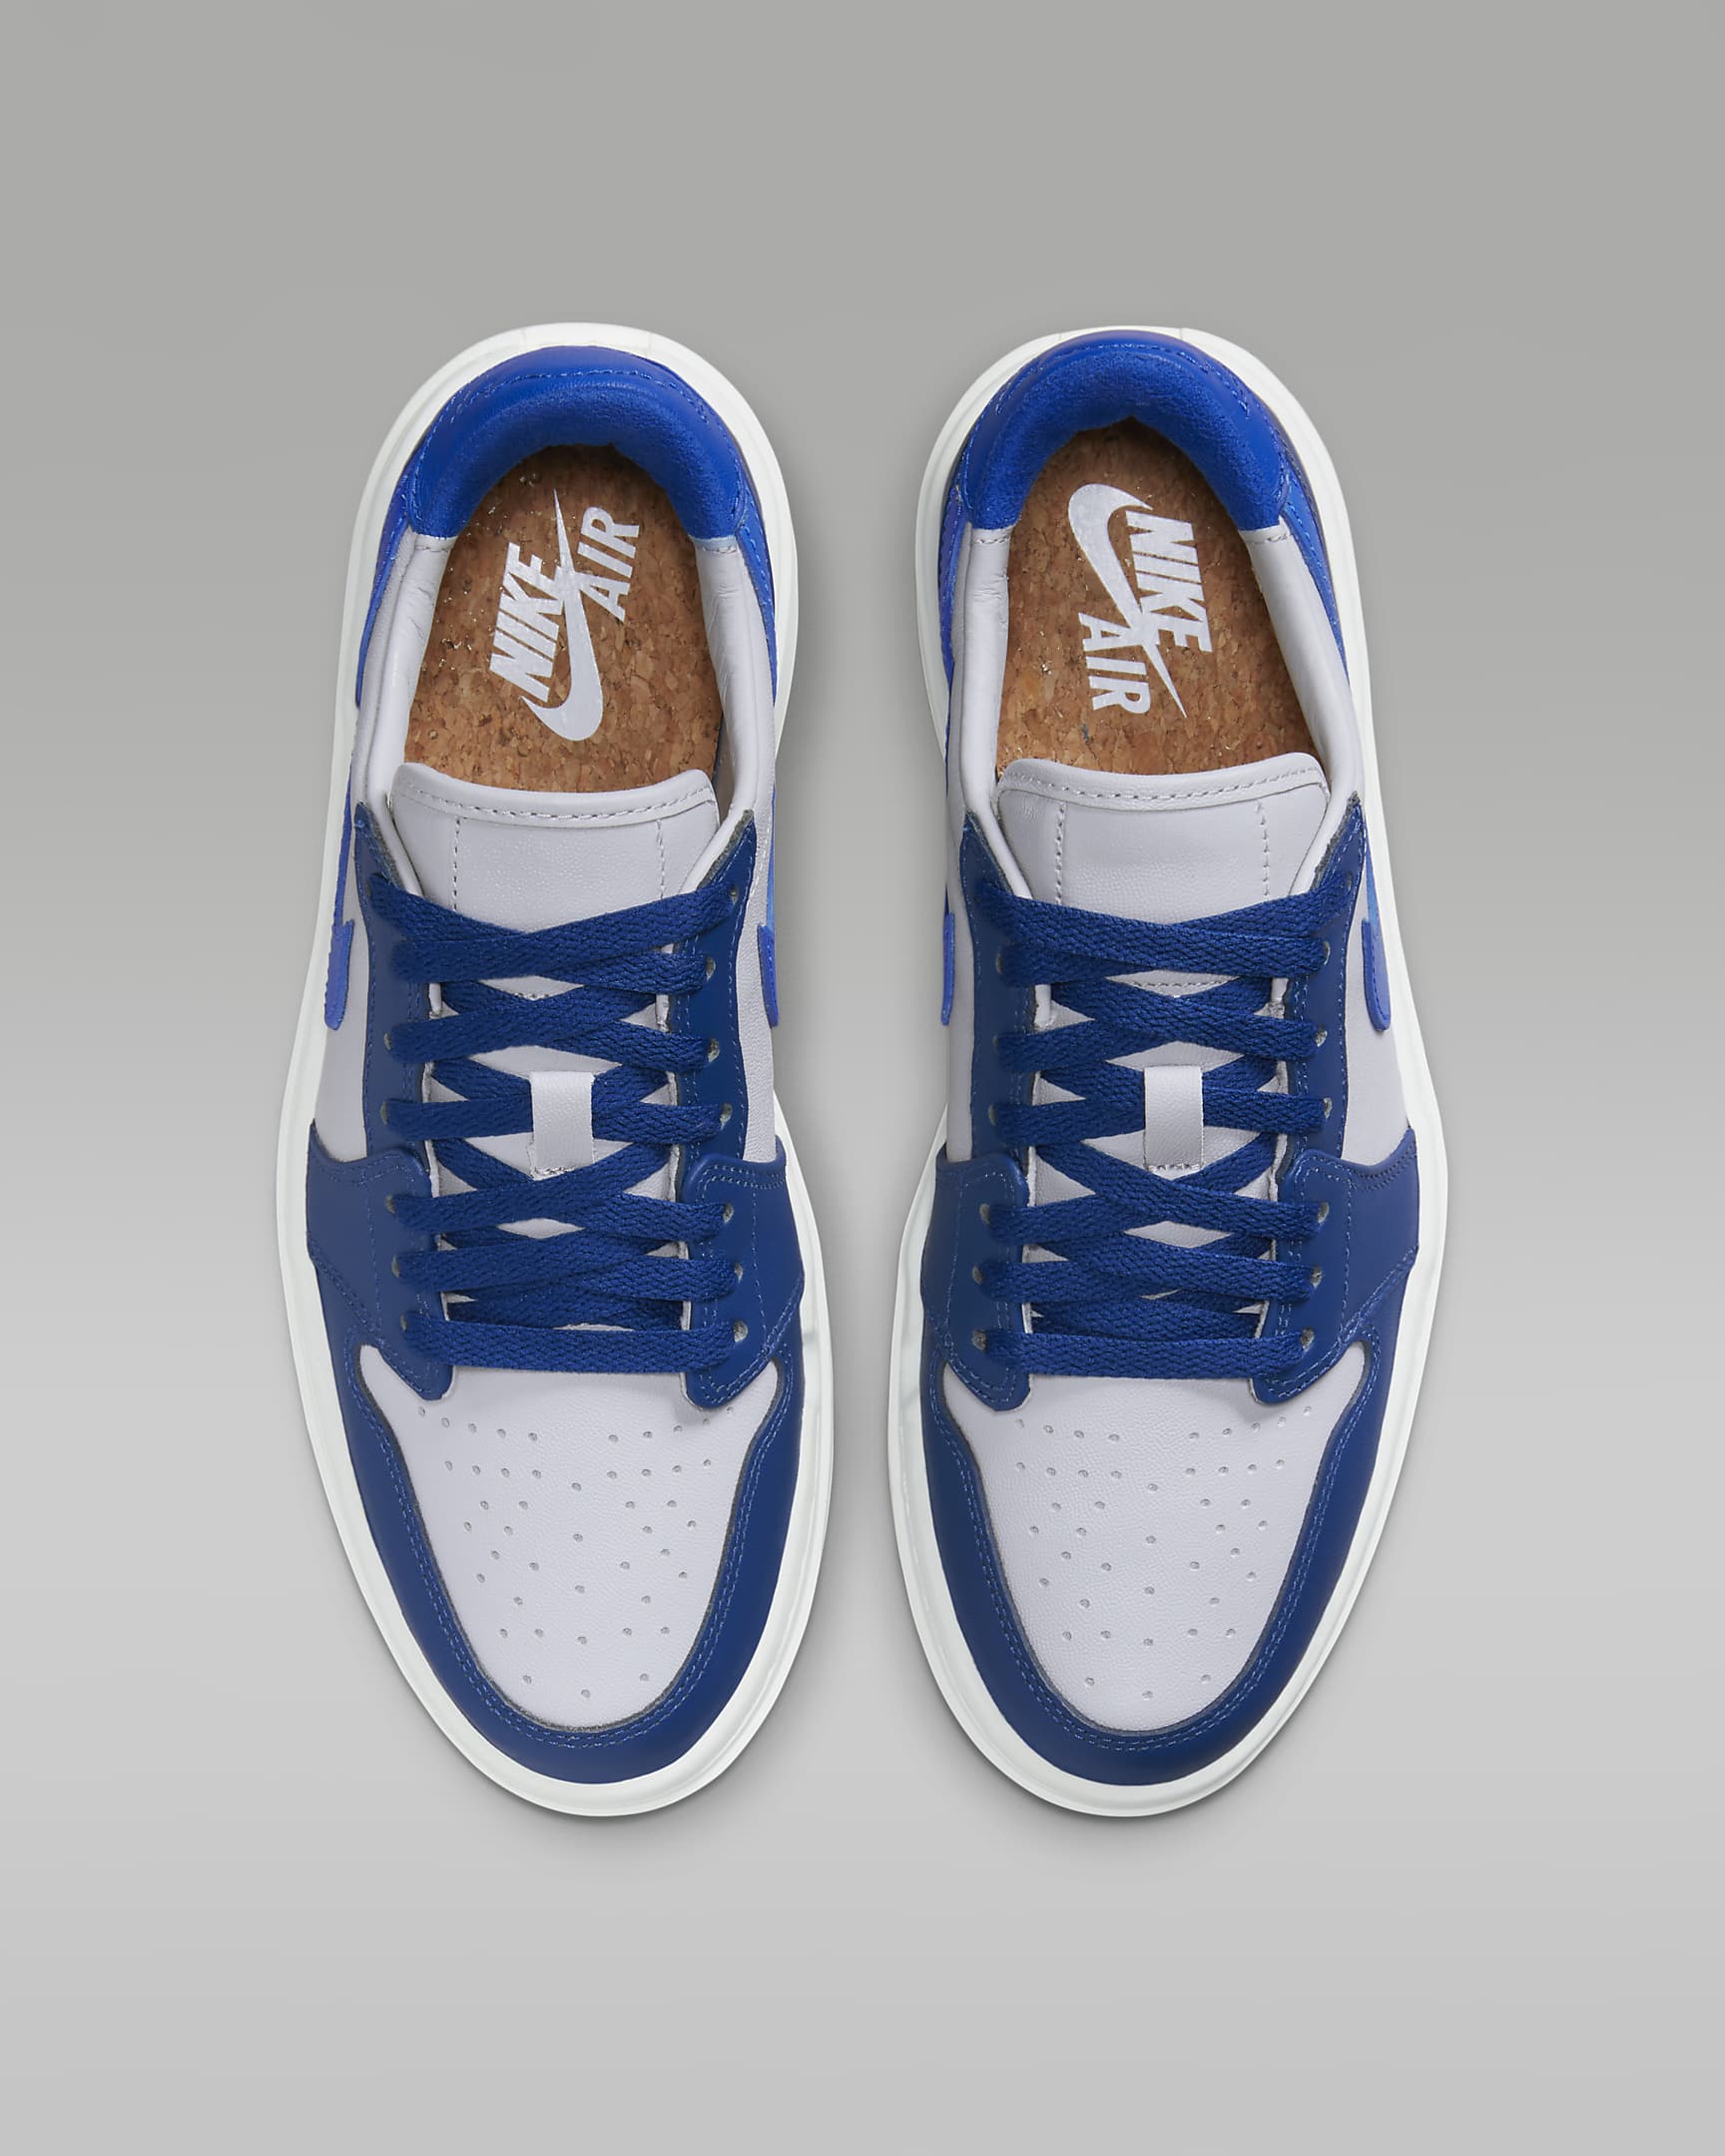 The Perfect Fit: Air Jordan 1 Elevate Low Women’s Shoes – Elevate Your Style Game Instantly!